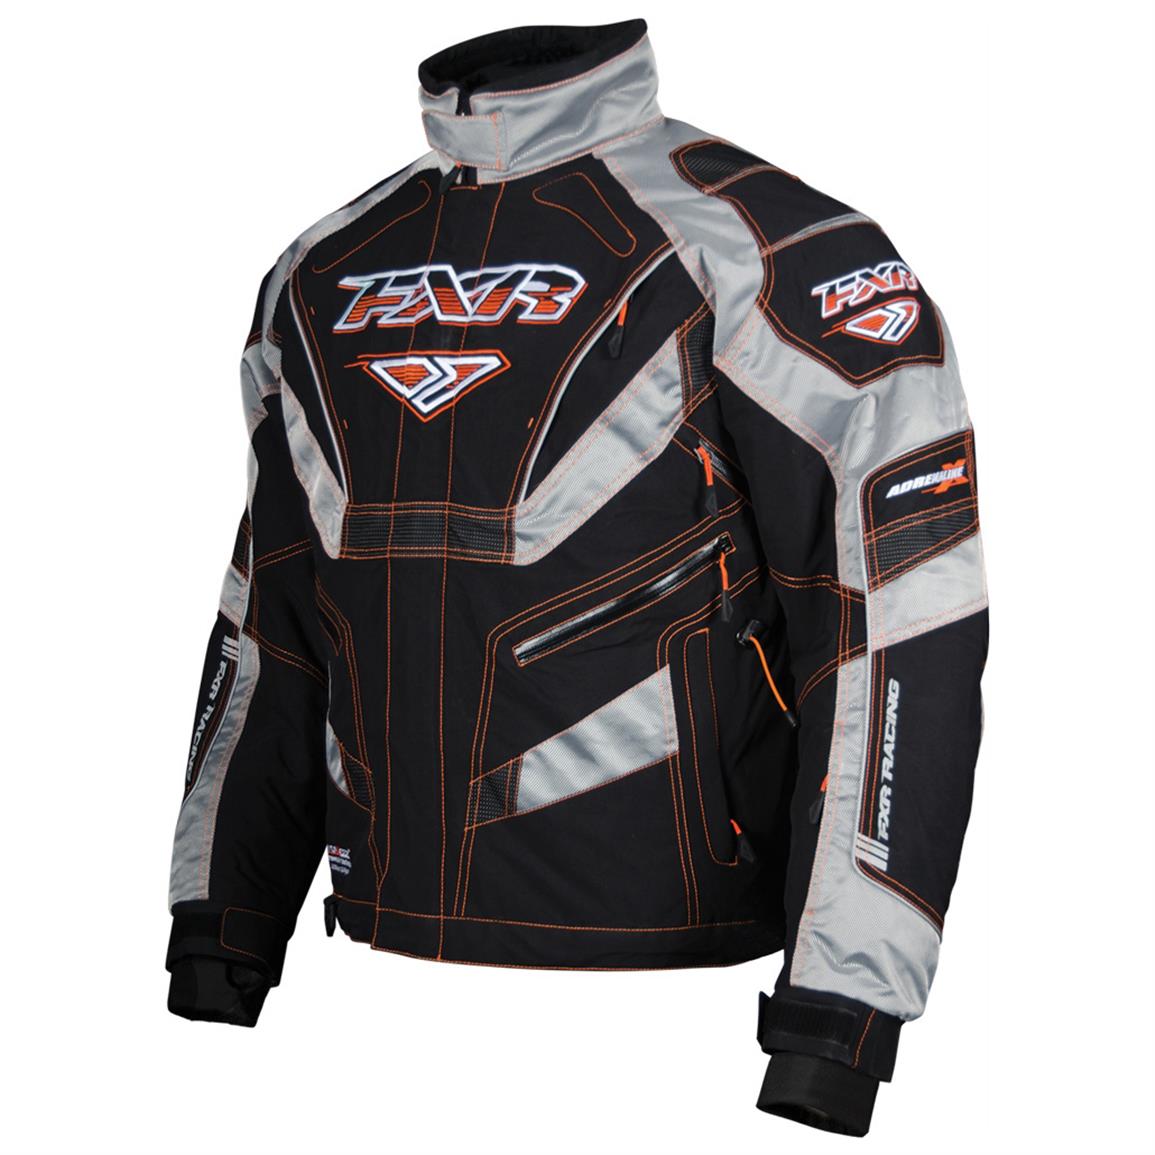 FXR® Adrenaline X Jacket - 588518, Snowmobile Clothing at Sportsman's Guide